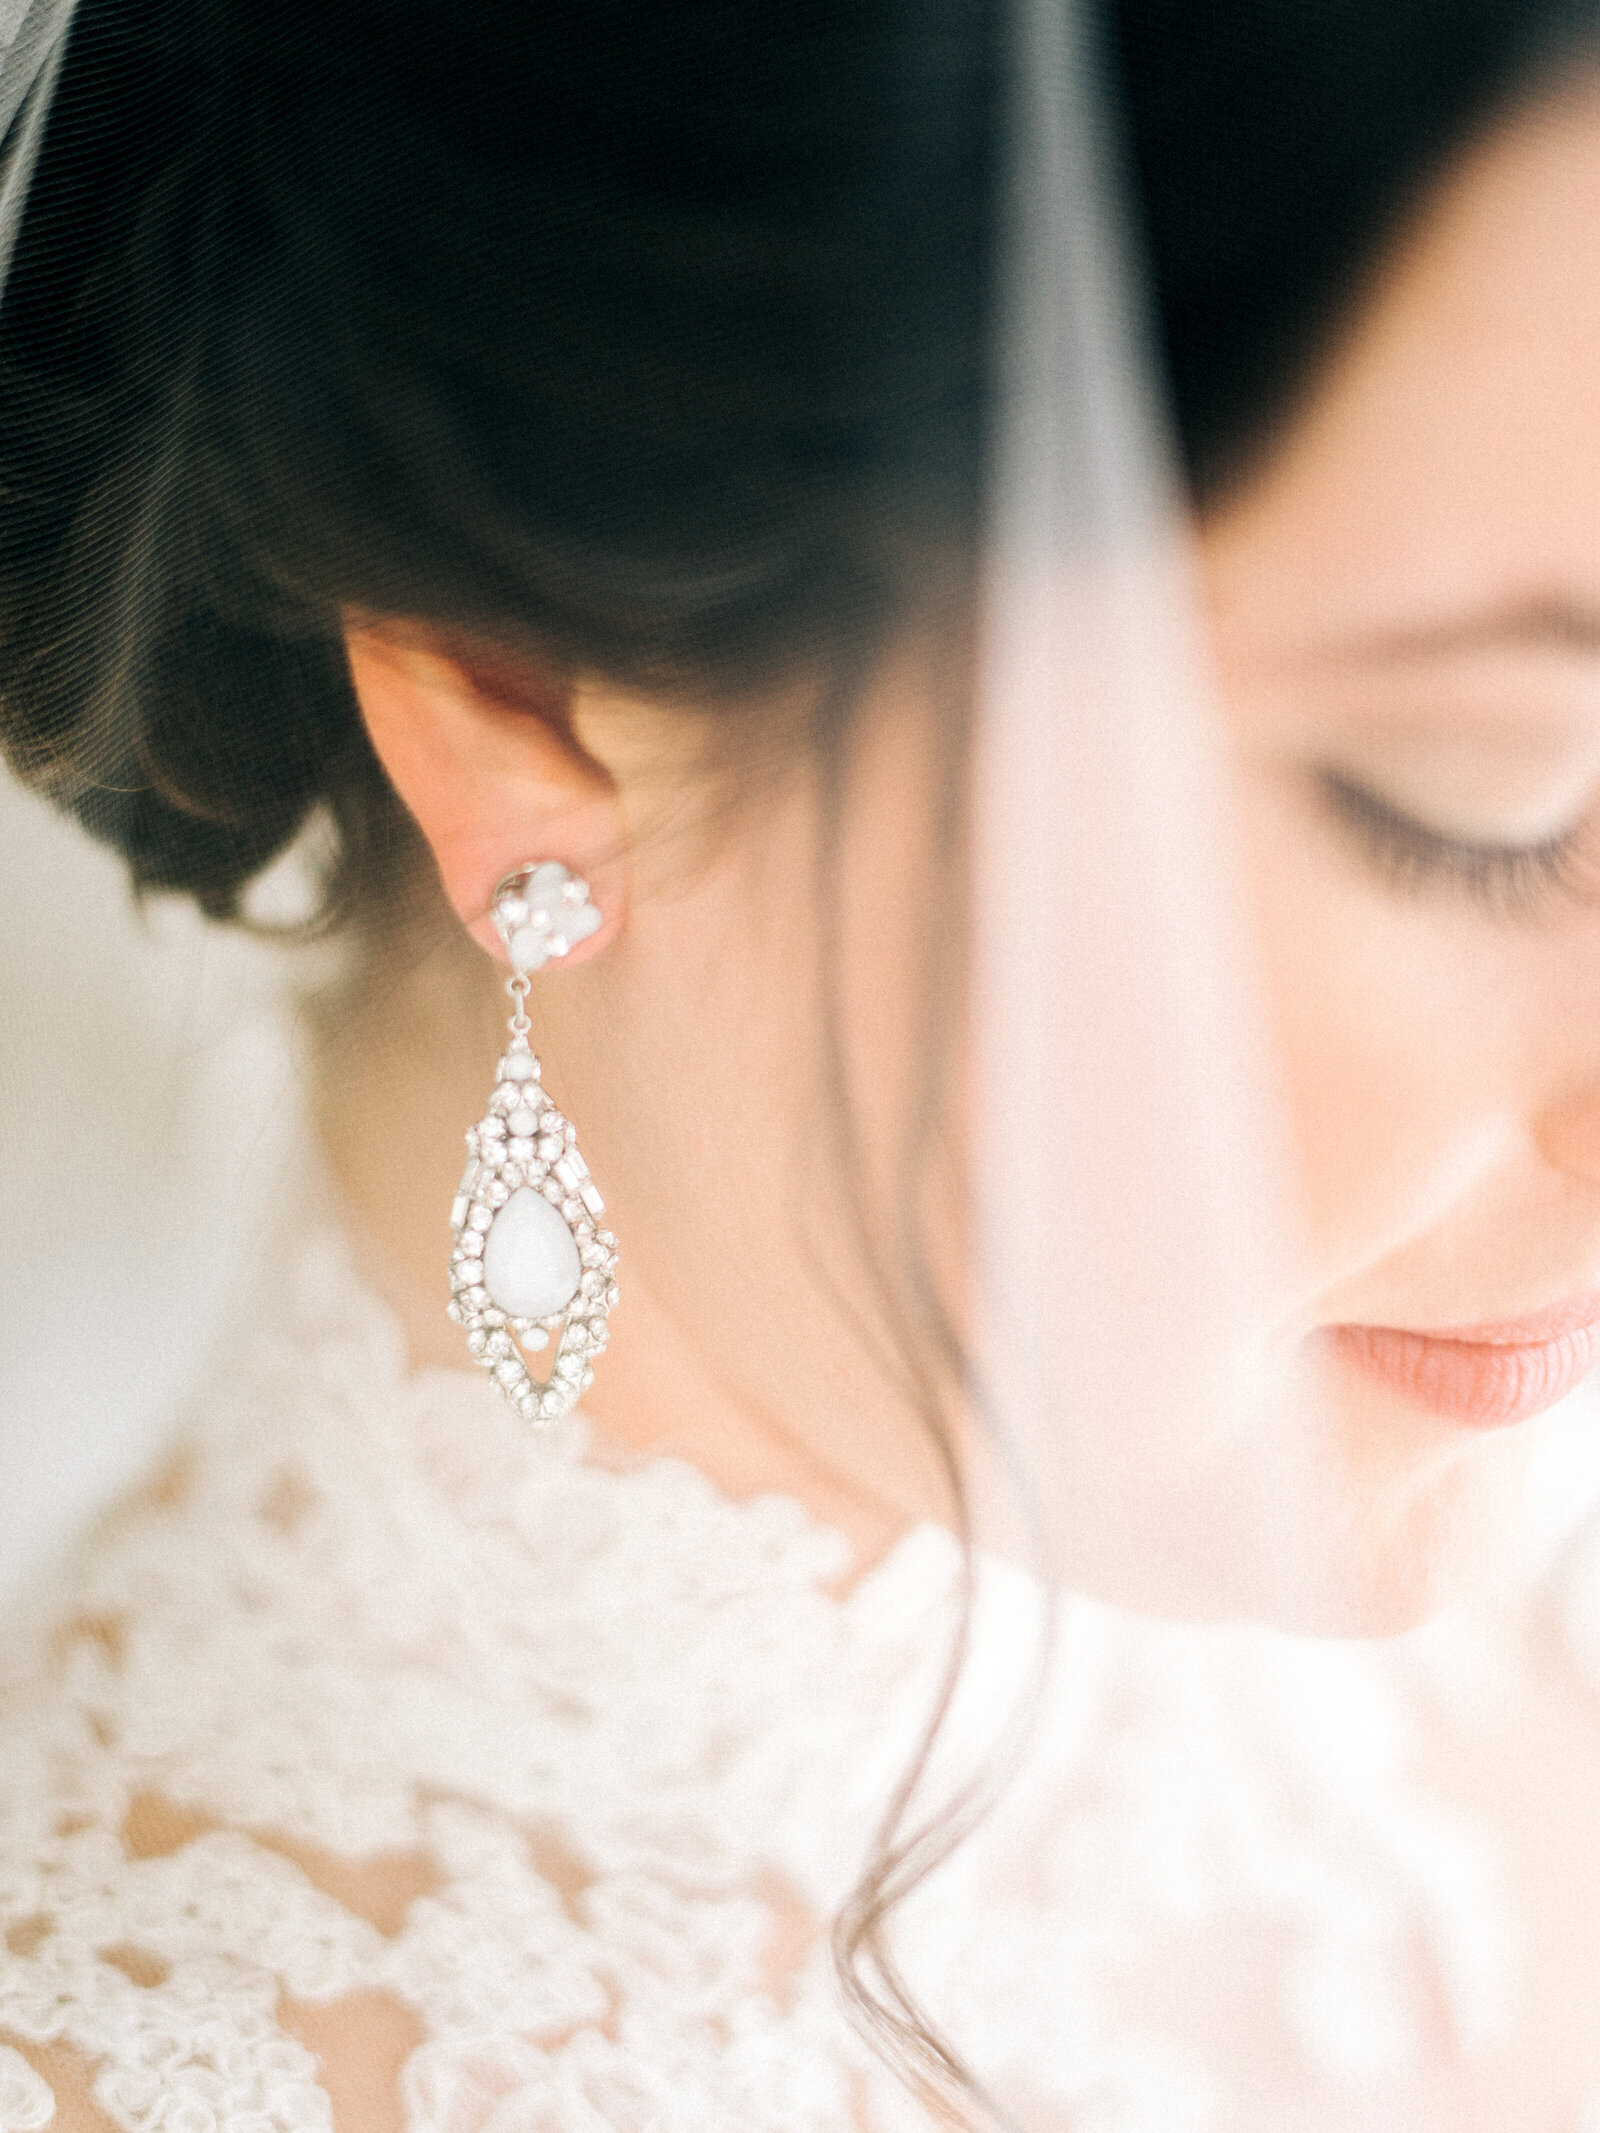 035-sean-cook-wedding-photography-jewelry-detail